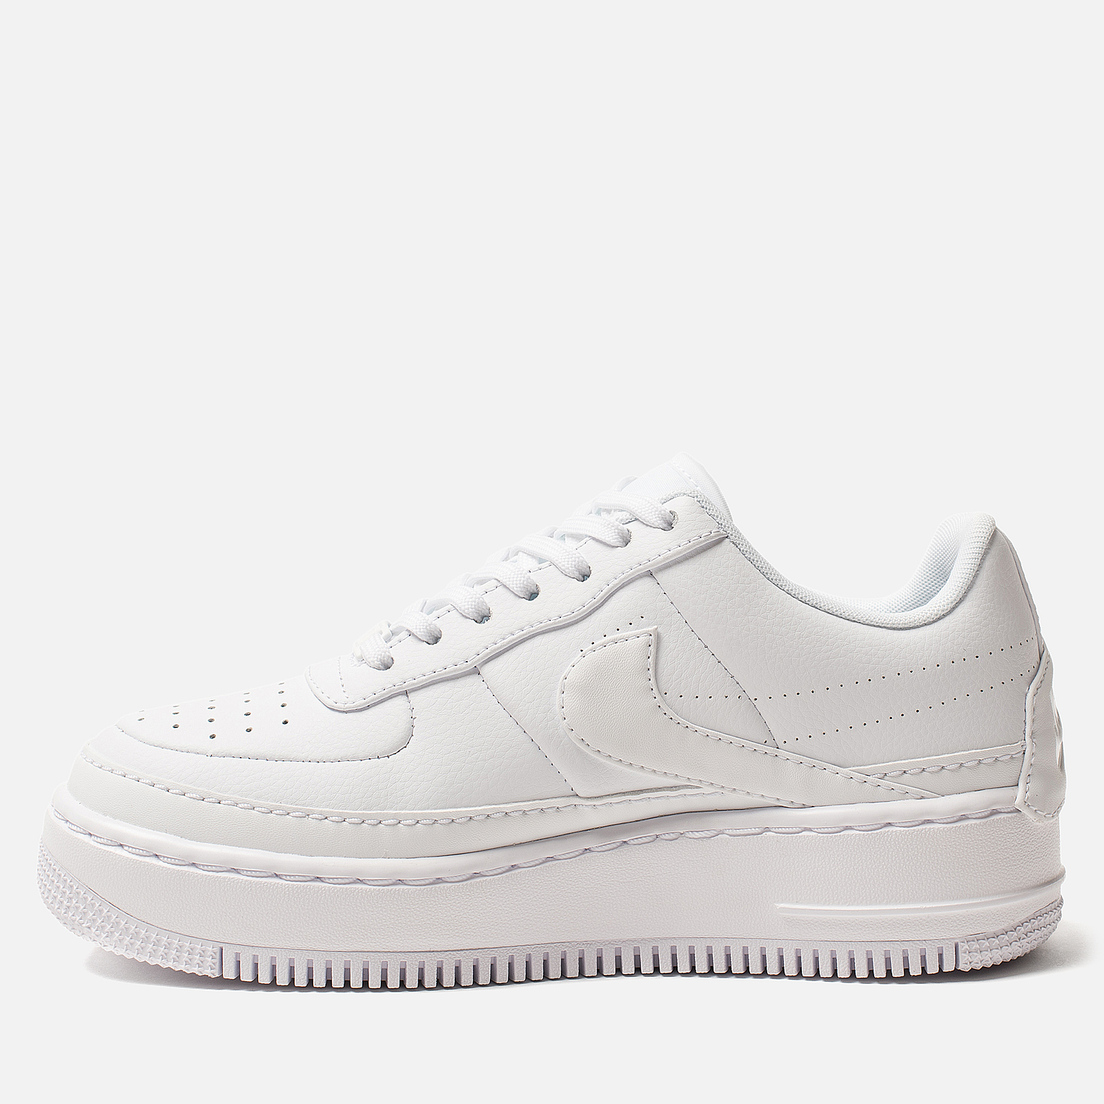 nike air force jester white and black